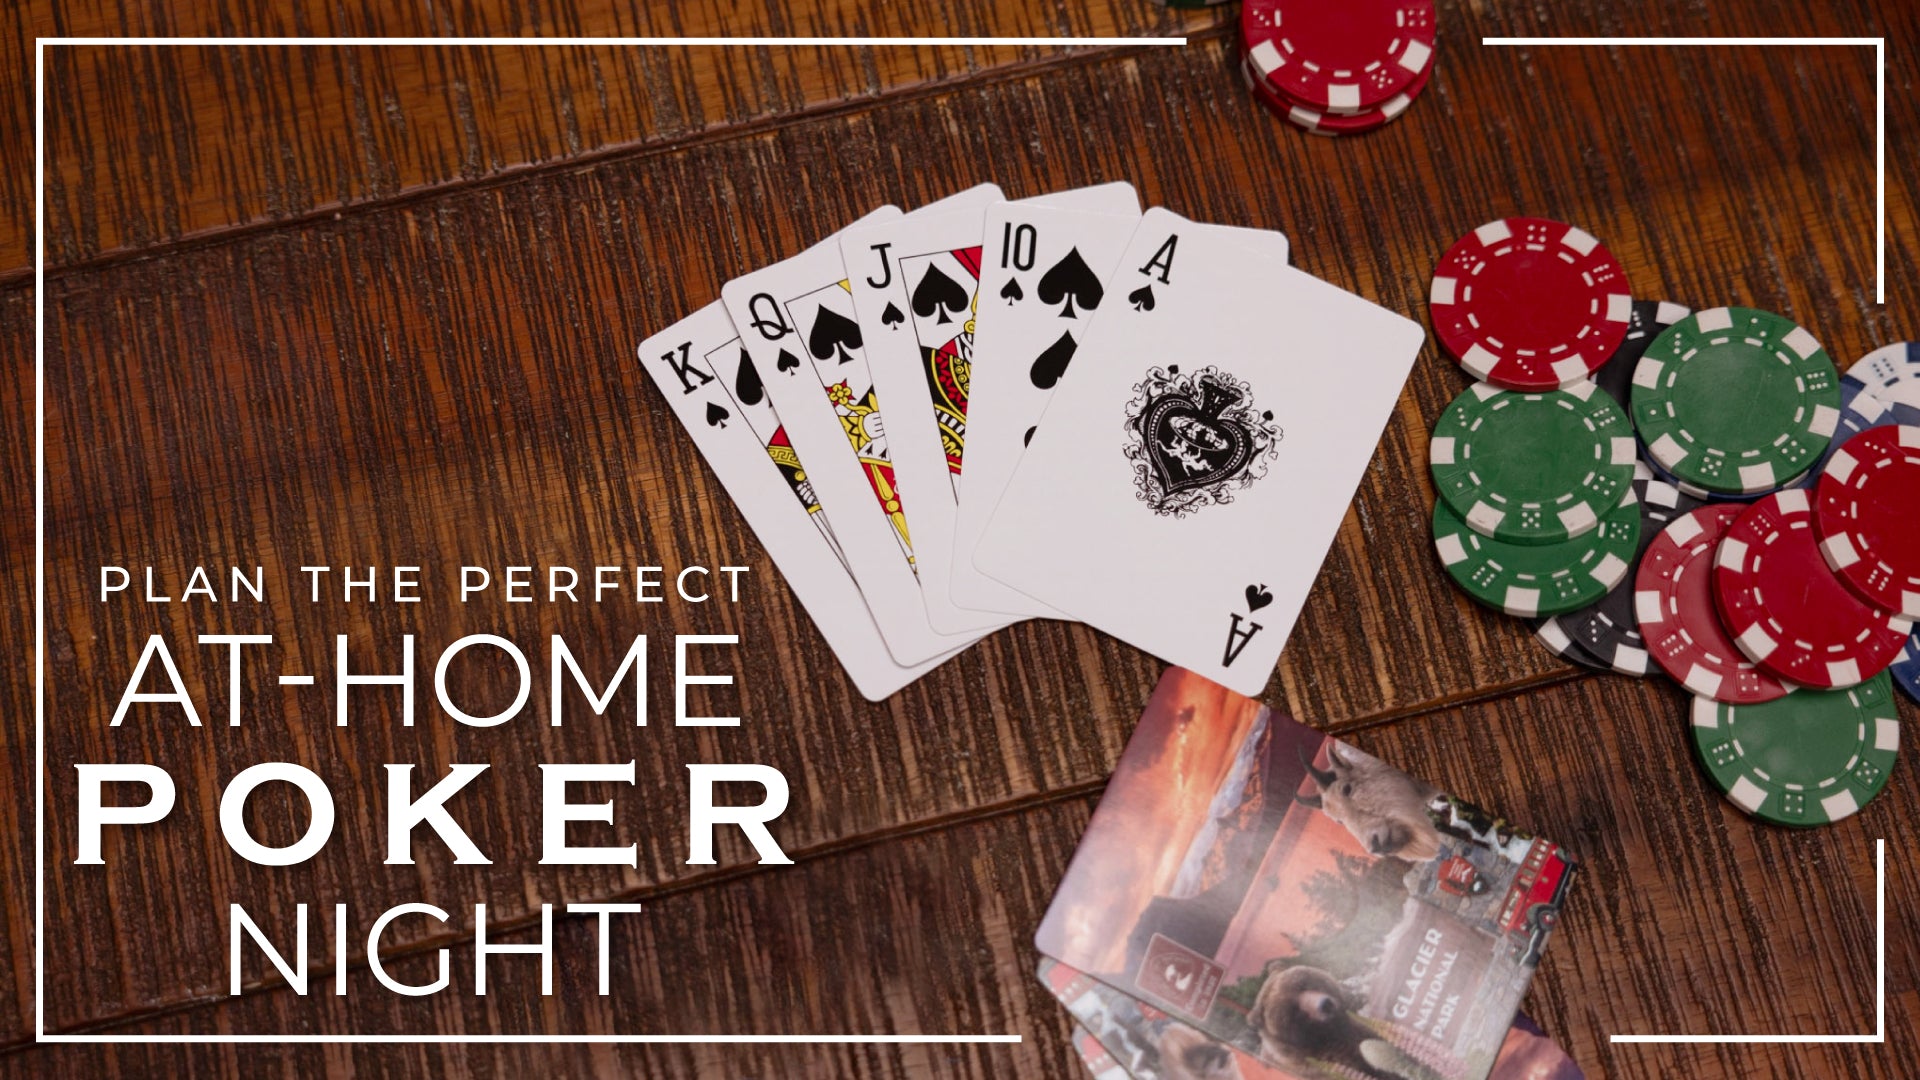 Plan the Perfect At-Home Poker Night!